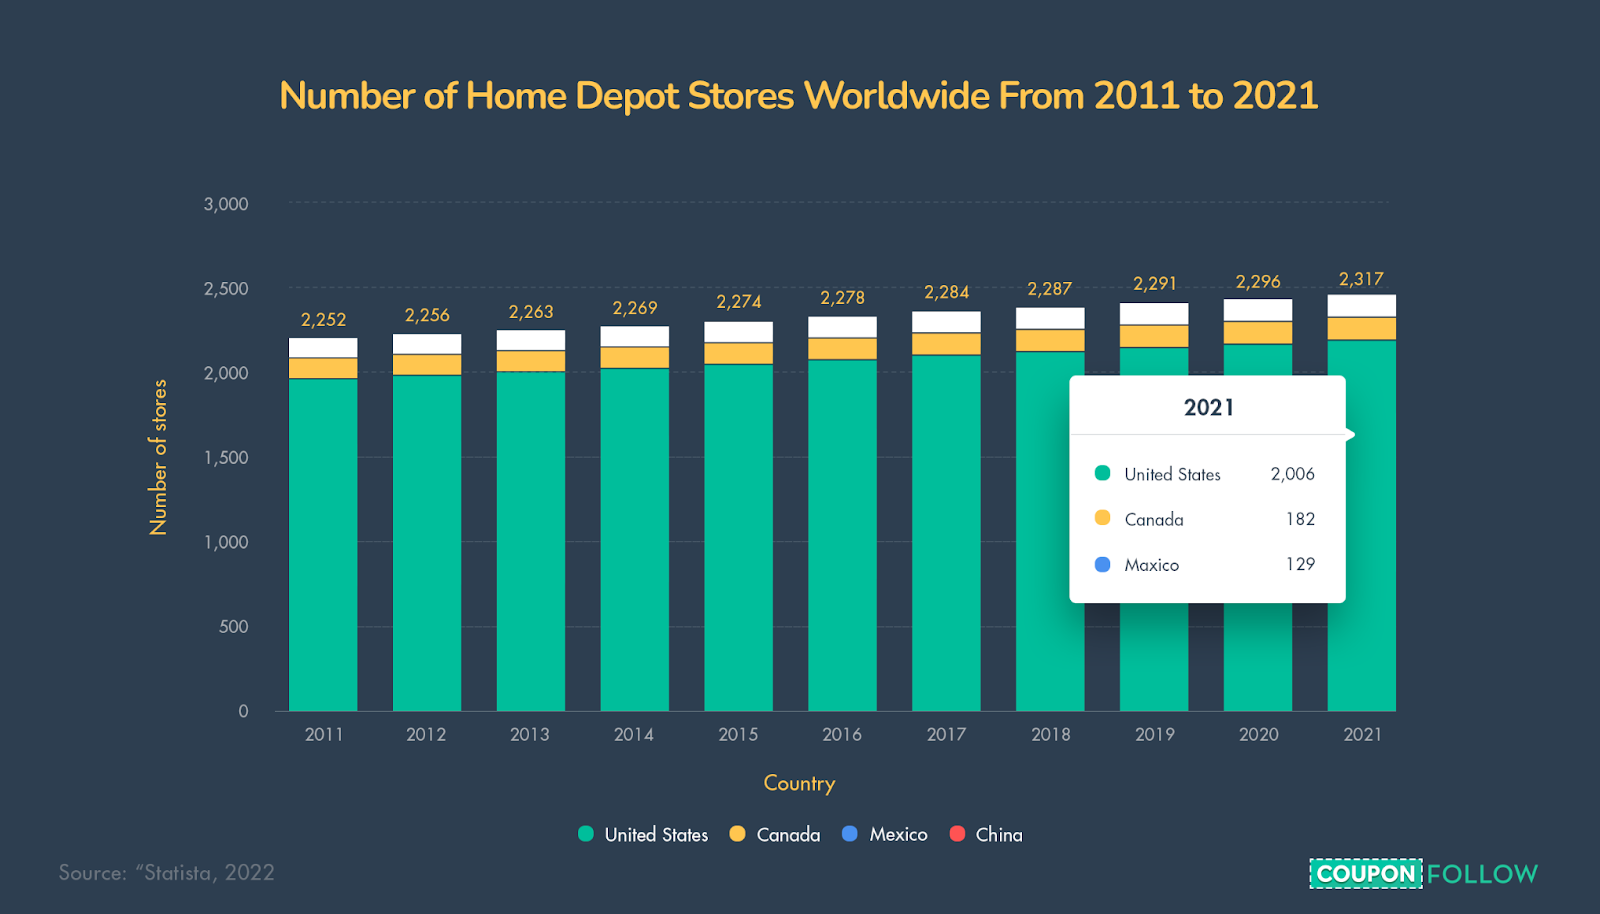 graph depicting the number of home depot stores worldwide from 2011 to 2021